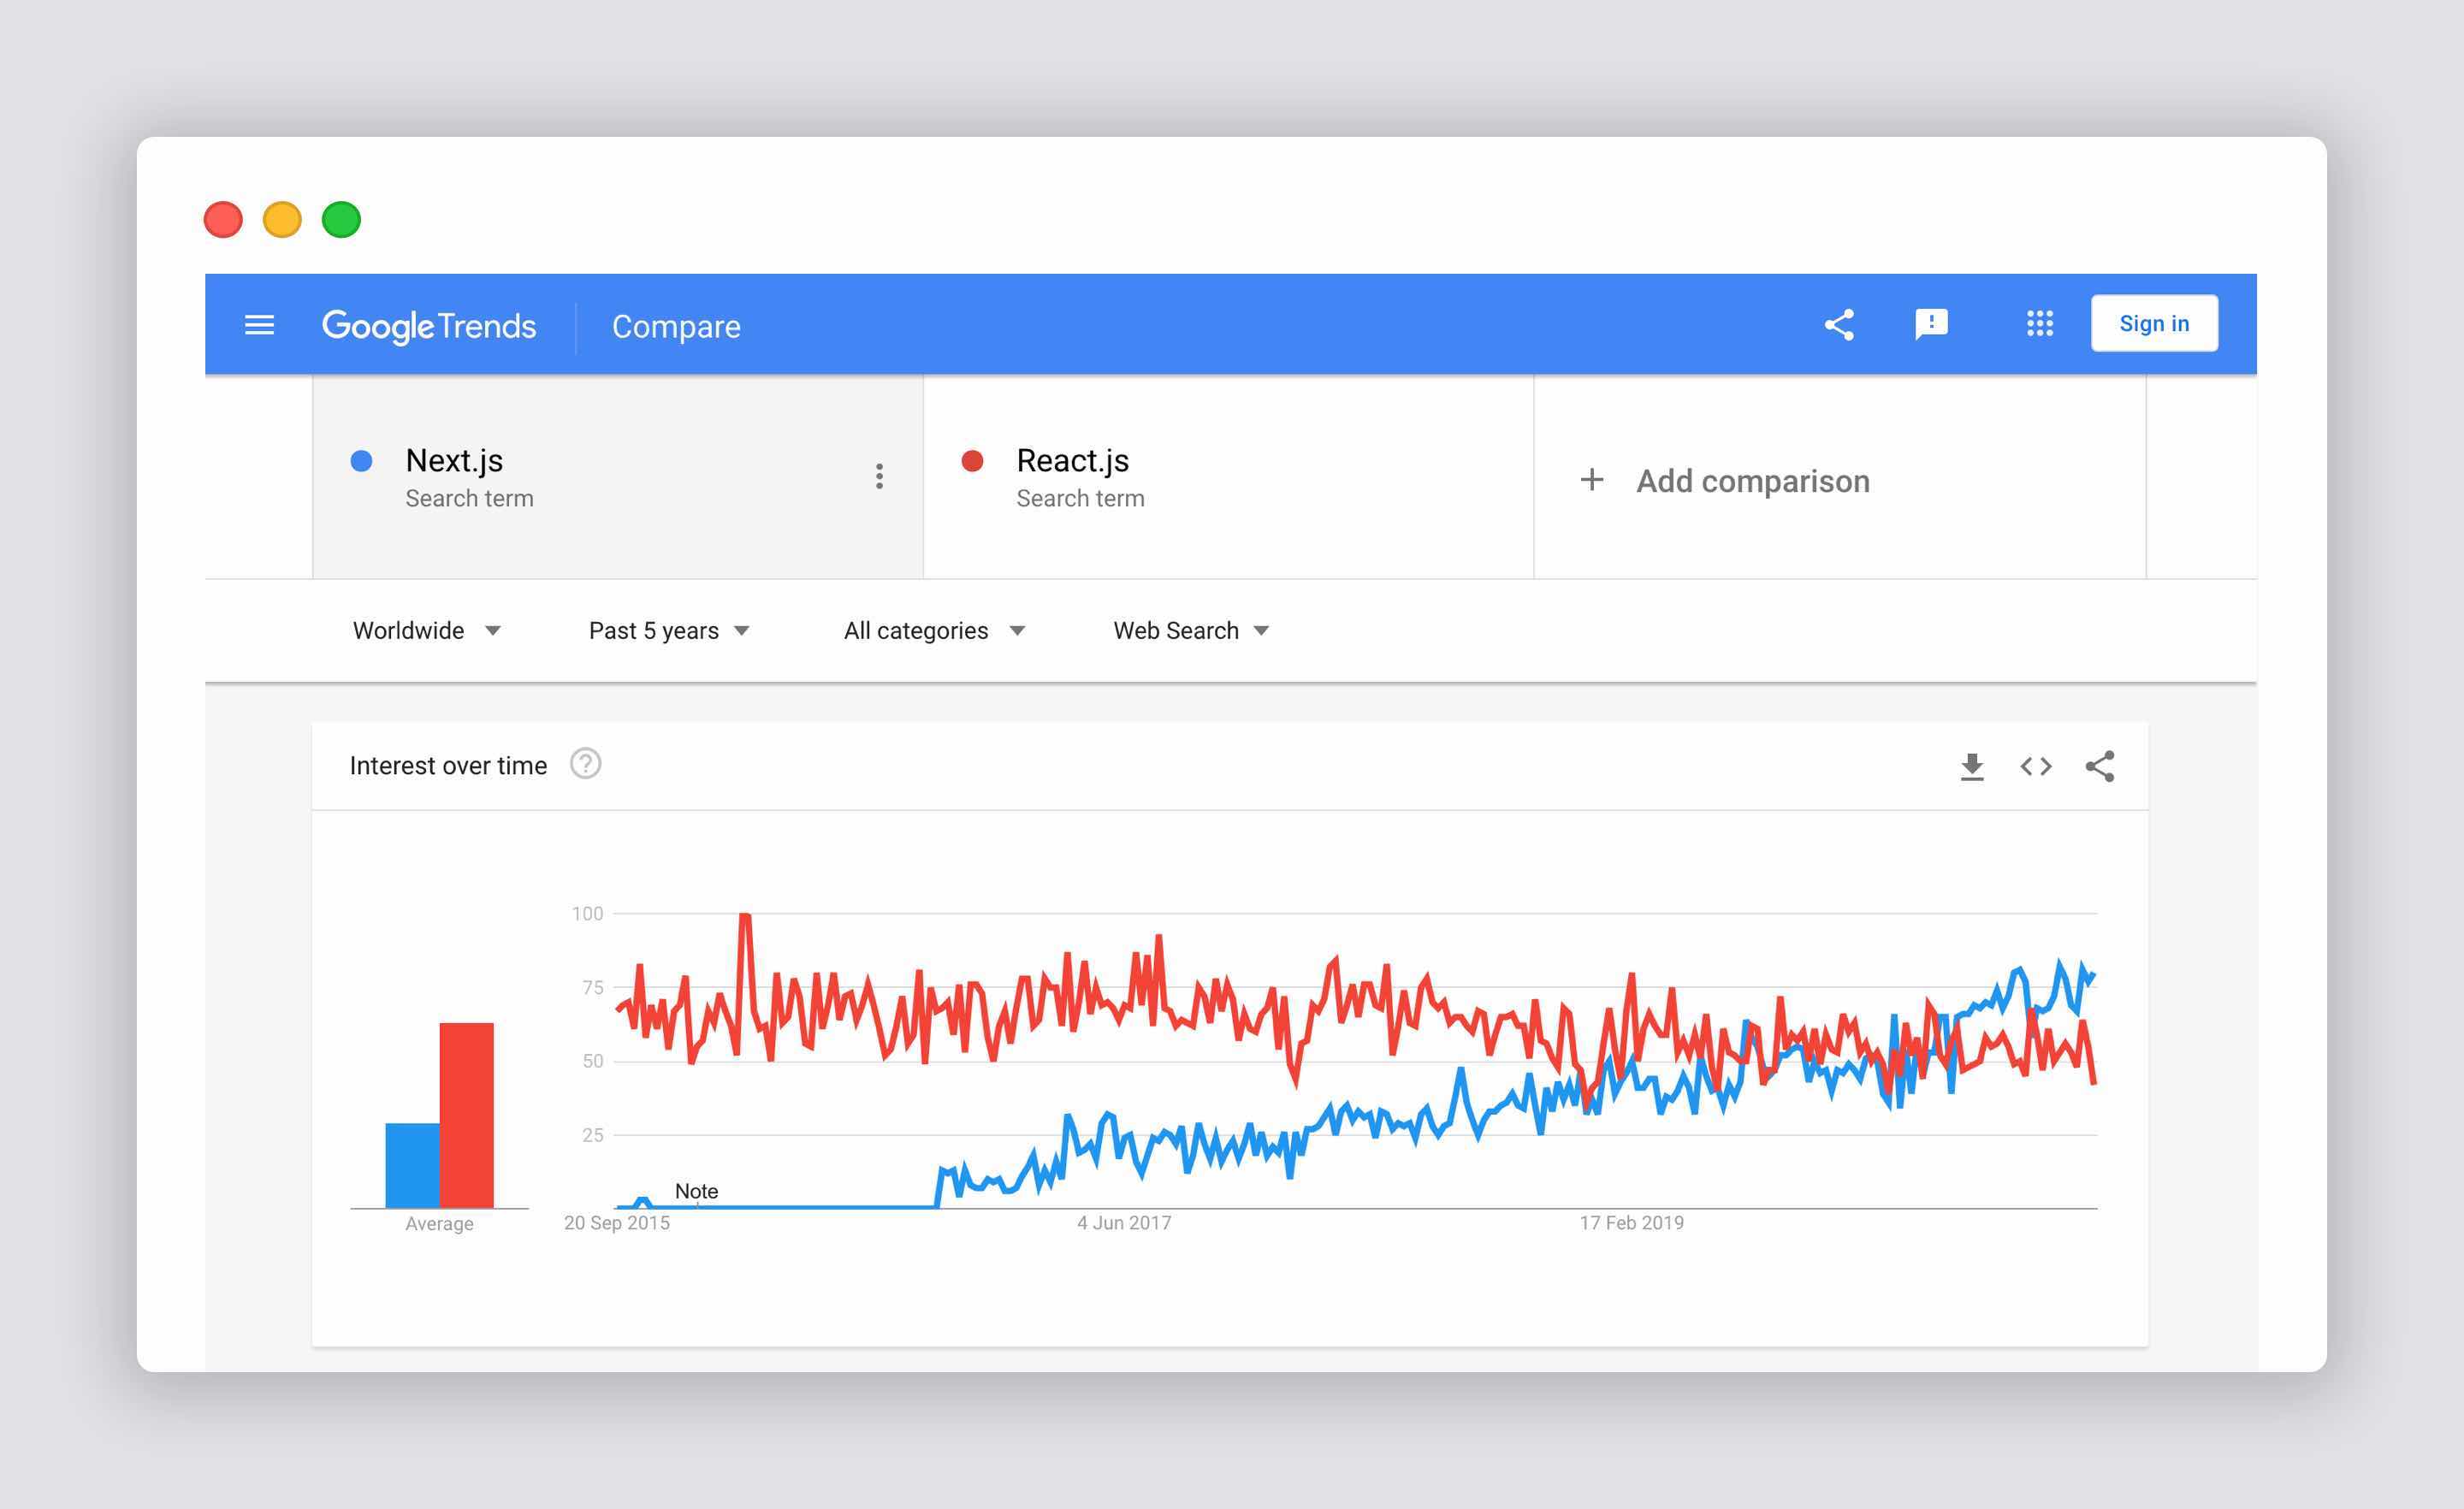 Next.js vs React Google Trends results over the last five years